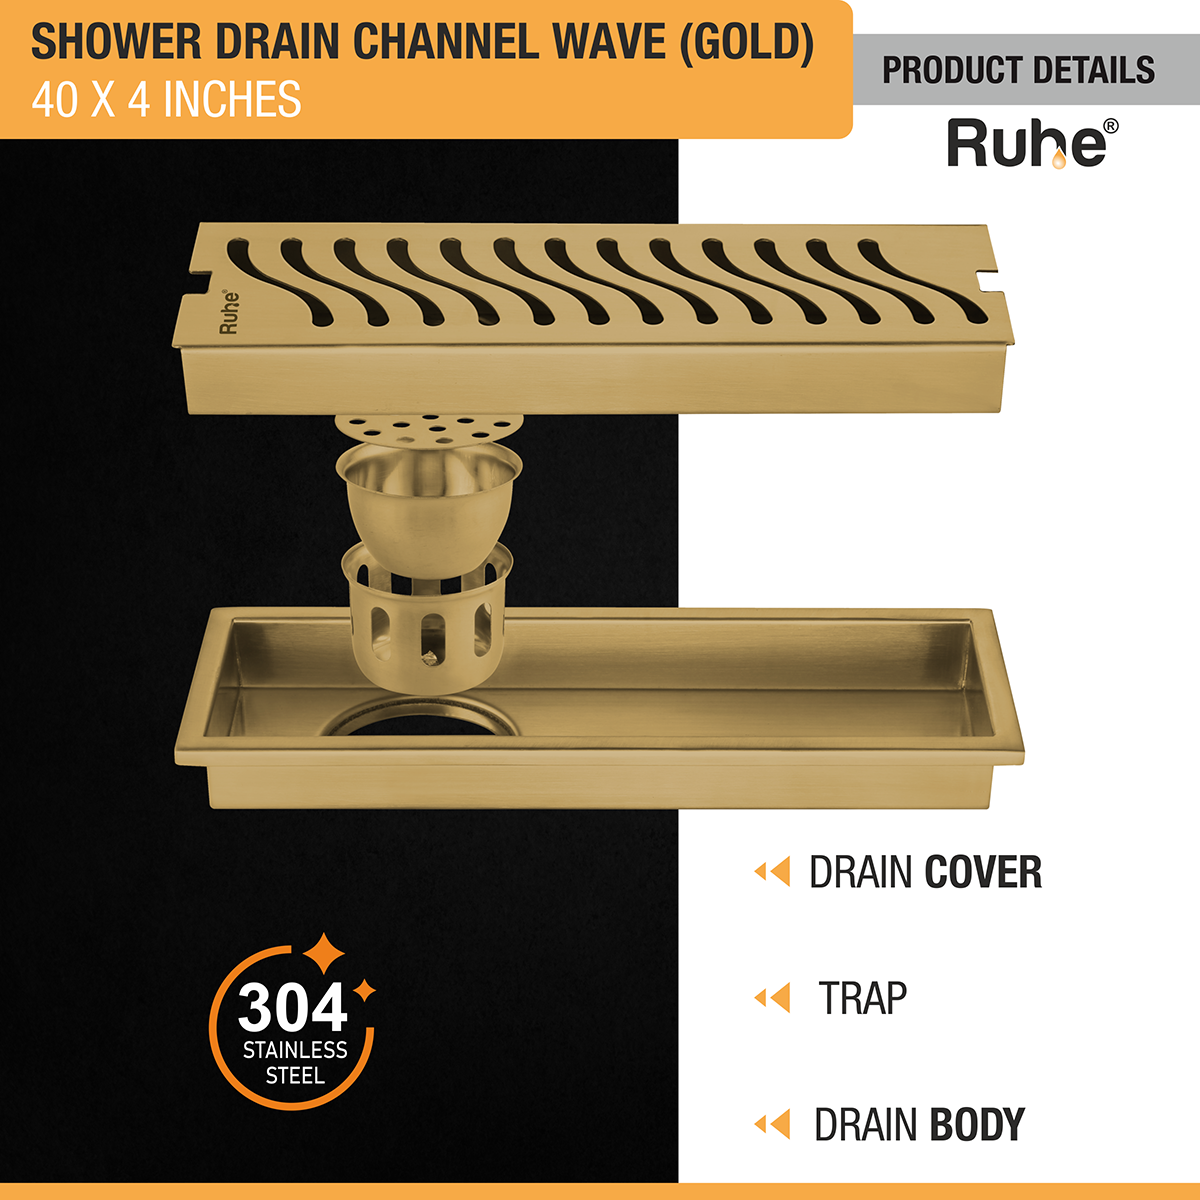 Wave Shower Drain Channel (40 x 4 Inches) YELLOW GOLD product details